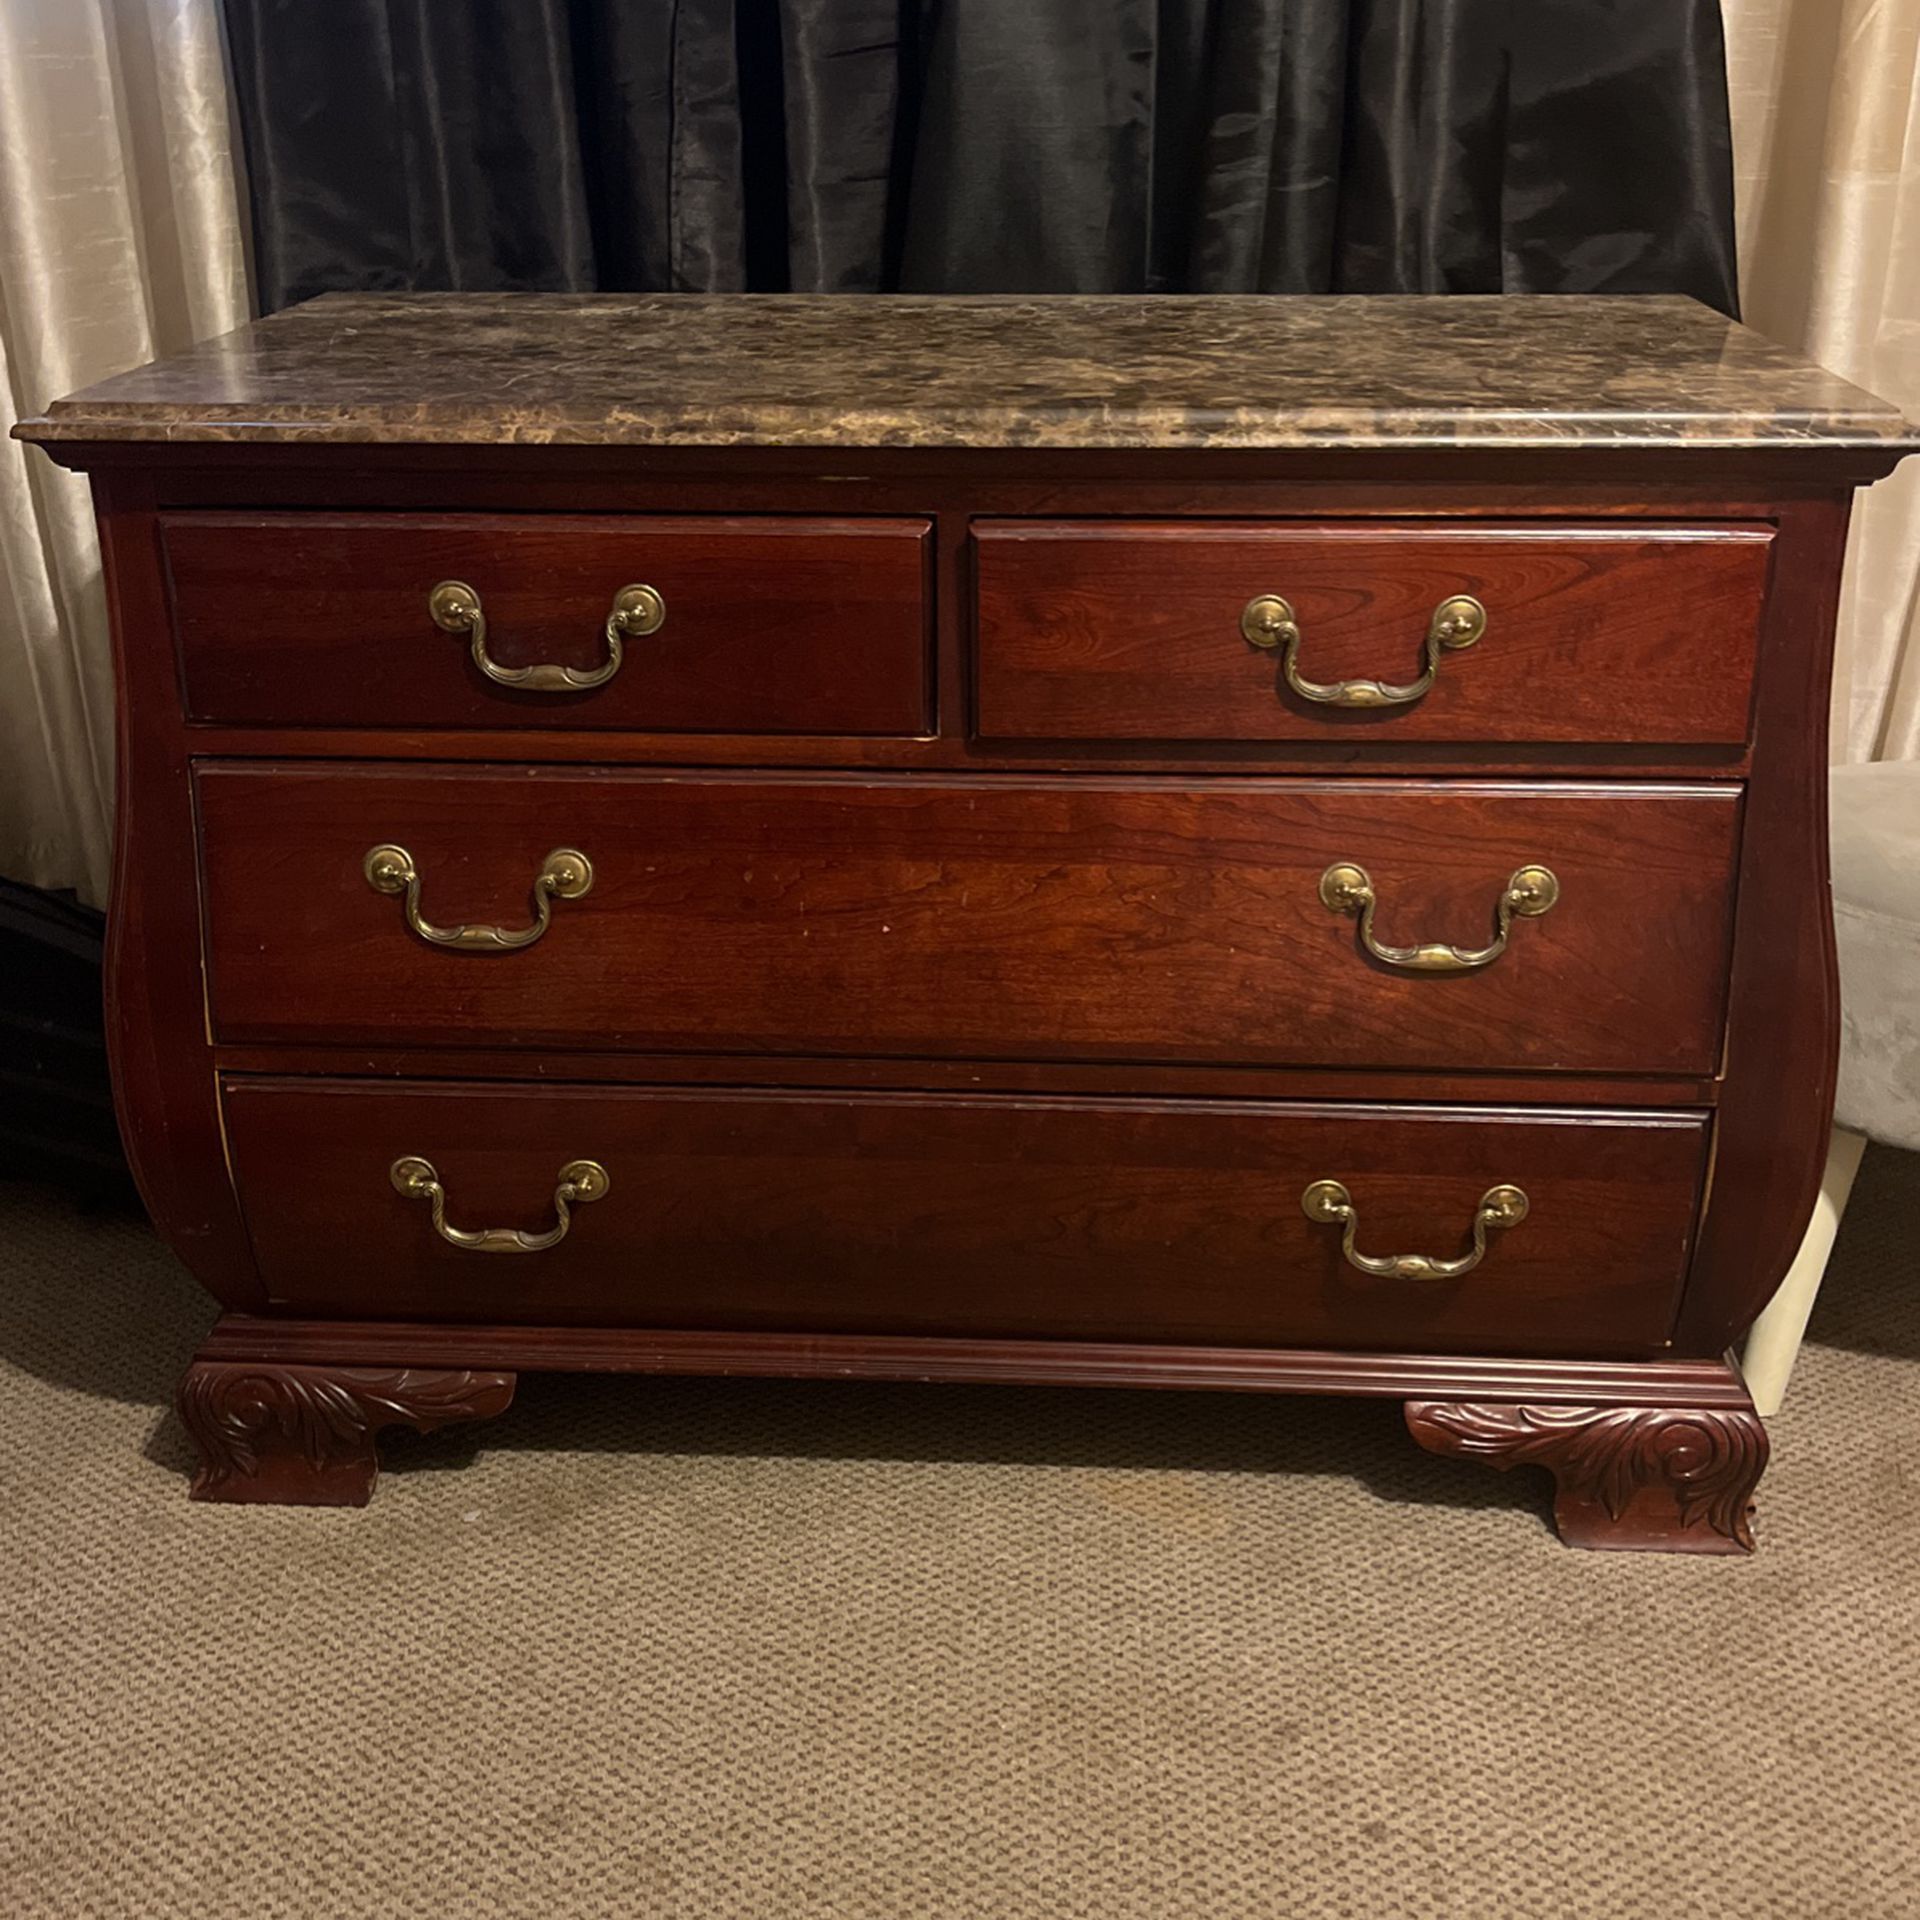 Solid Cherry Pennsylvania House Brand Dresser With Real Solid Marble Slab Top.